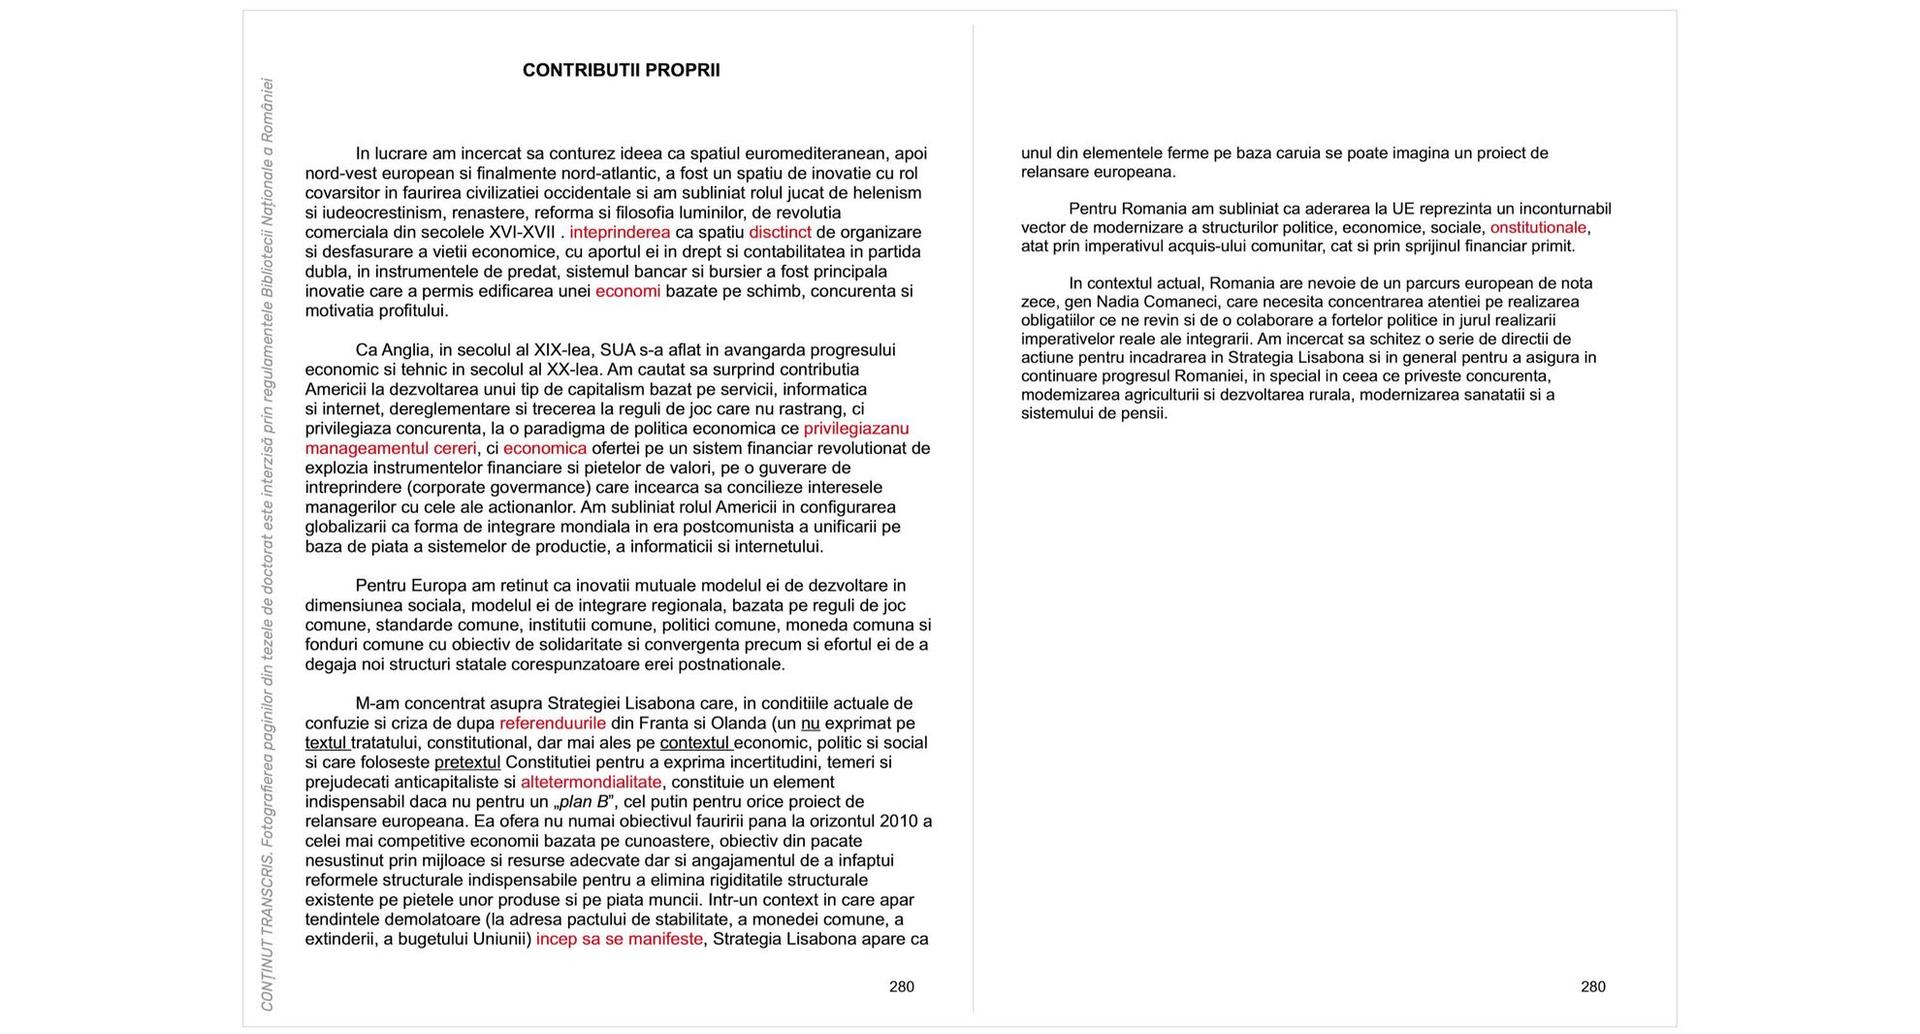 The two pages titled "OWN CONTRIBUTIONS" from Mircea Geoană's doctoral thesis (pp. 280-281). The regulations of the National Library of Romania do not allow photographing pages from doctoral theses, and the content in the image is transcribed exactly as in the original (lack of diacritics and spelling errors, marked in red by <strong>PressOne</strong>, belong to the author).